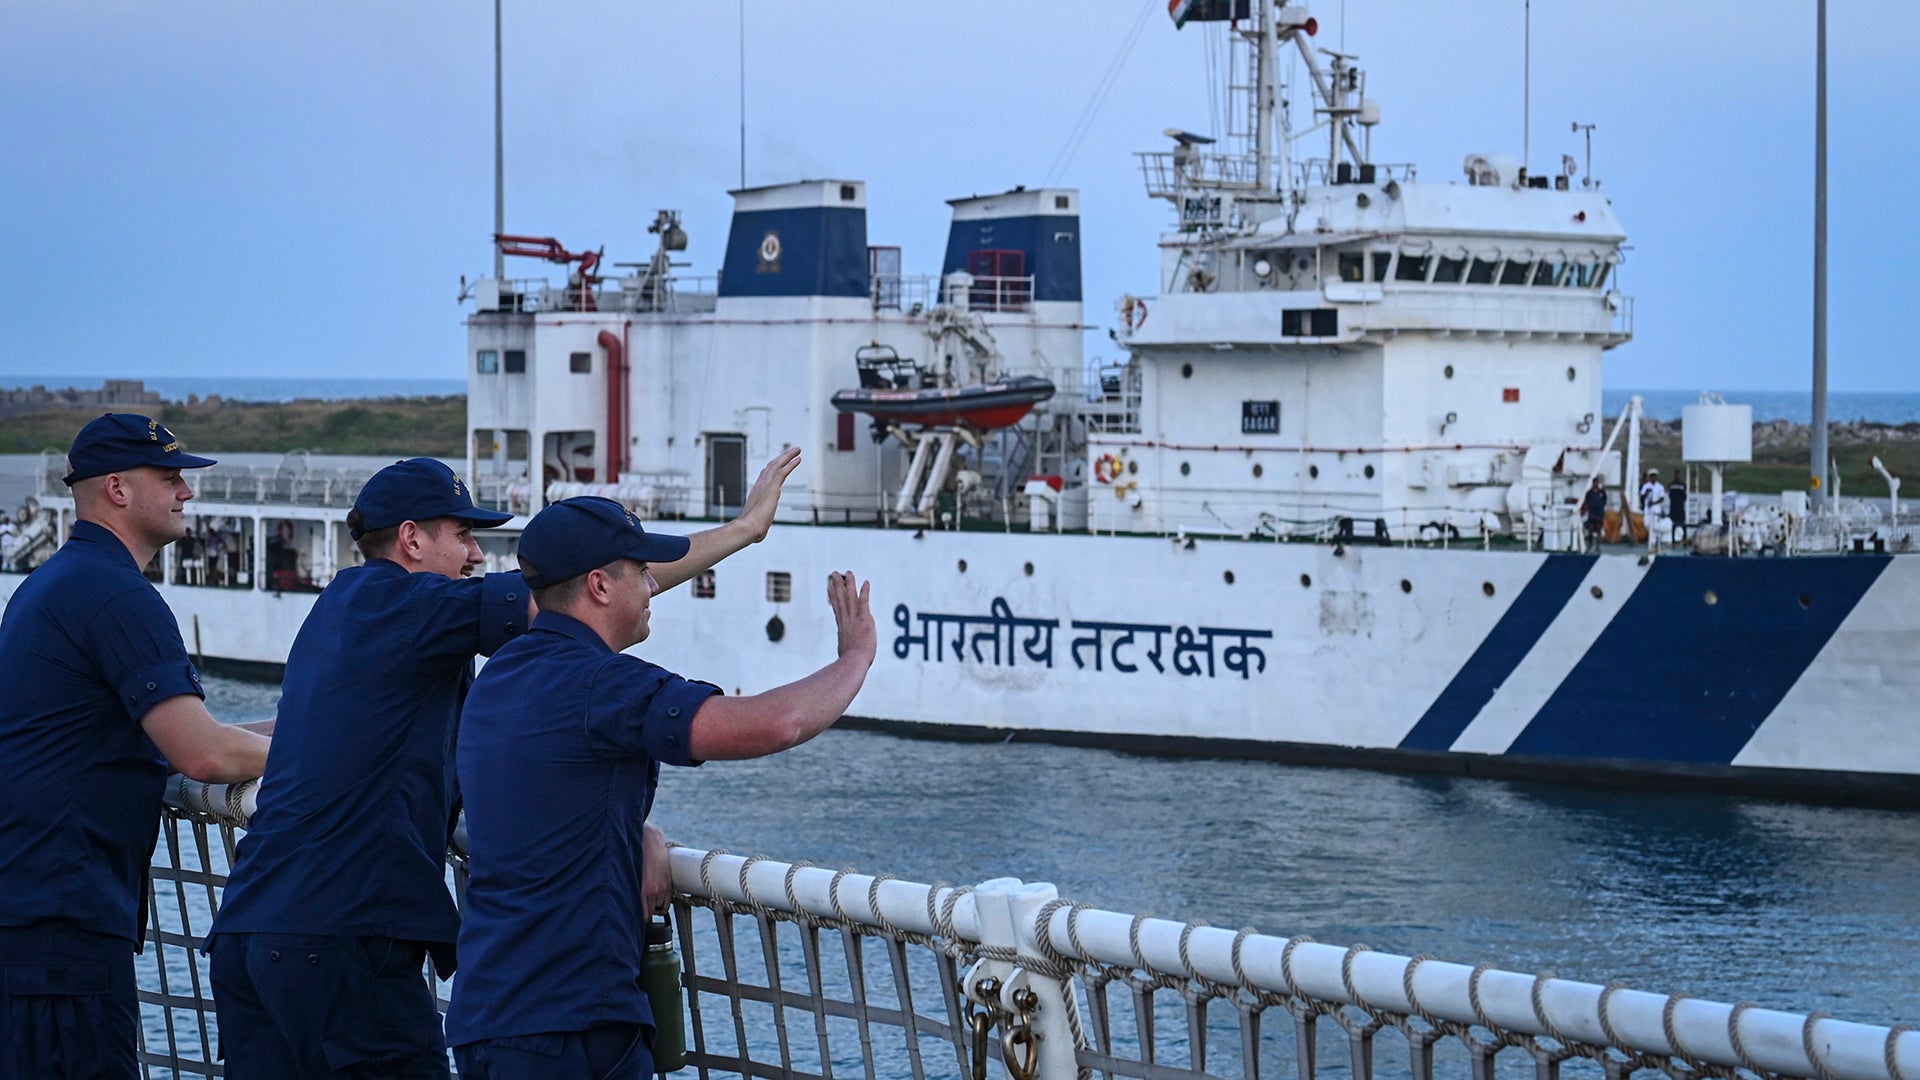 Members from U.S. Coast Guard Cutter Midgett (WMSL 757) wave to individuals aboard an Indian Coast Guard vessel as the cutter pulled into Chennai, India, on Sept. 16, 2022. The crew of the Midgett is on a several-month deployment to promote a free and open Indo-Pacific. (U.S. Coast Guard photo by Petty Officer Steve Strohmaier)